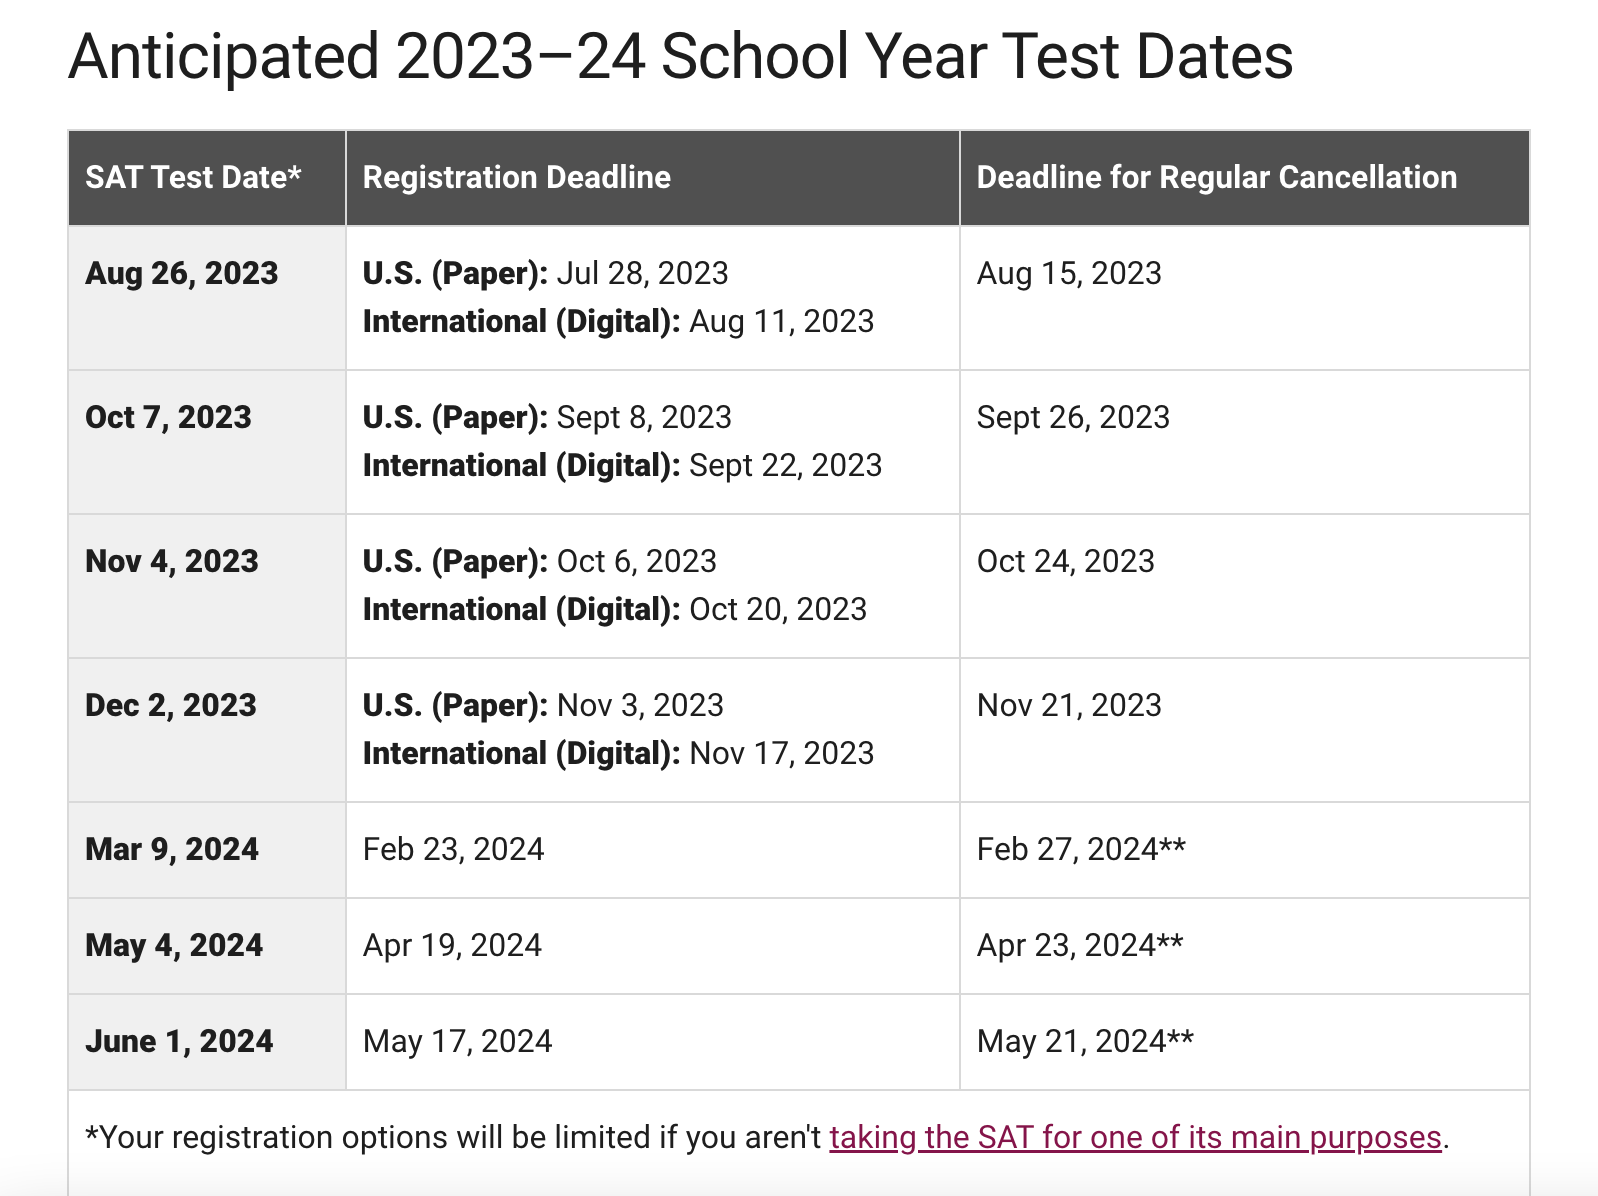 Update First digital SAT administrations in the U.S. still planned to